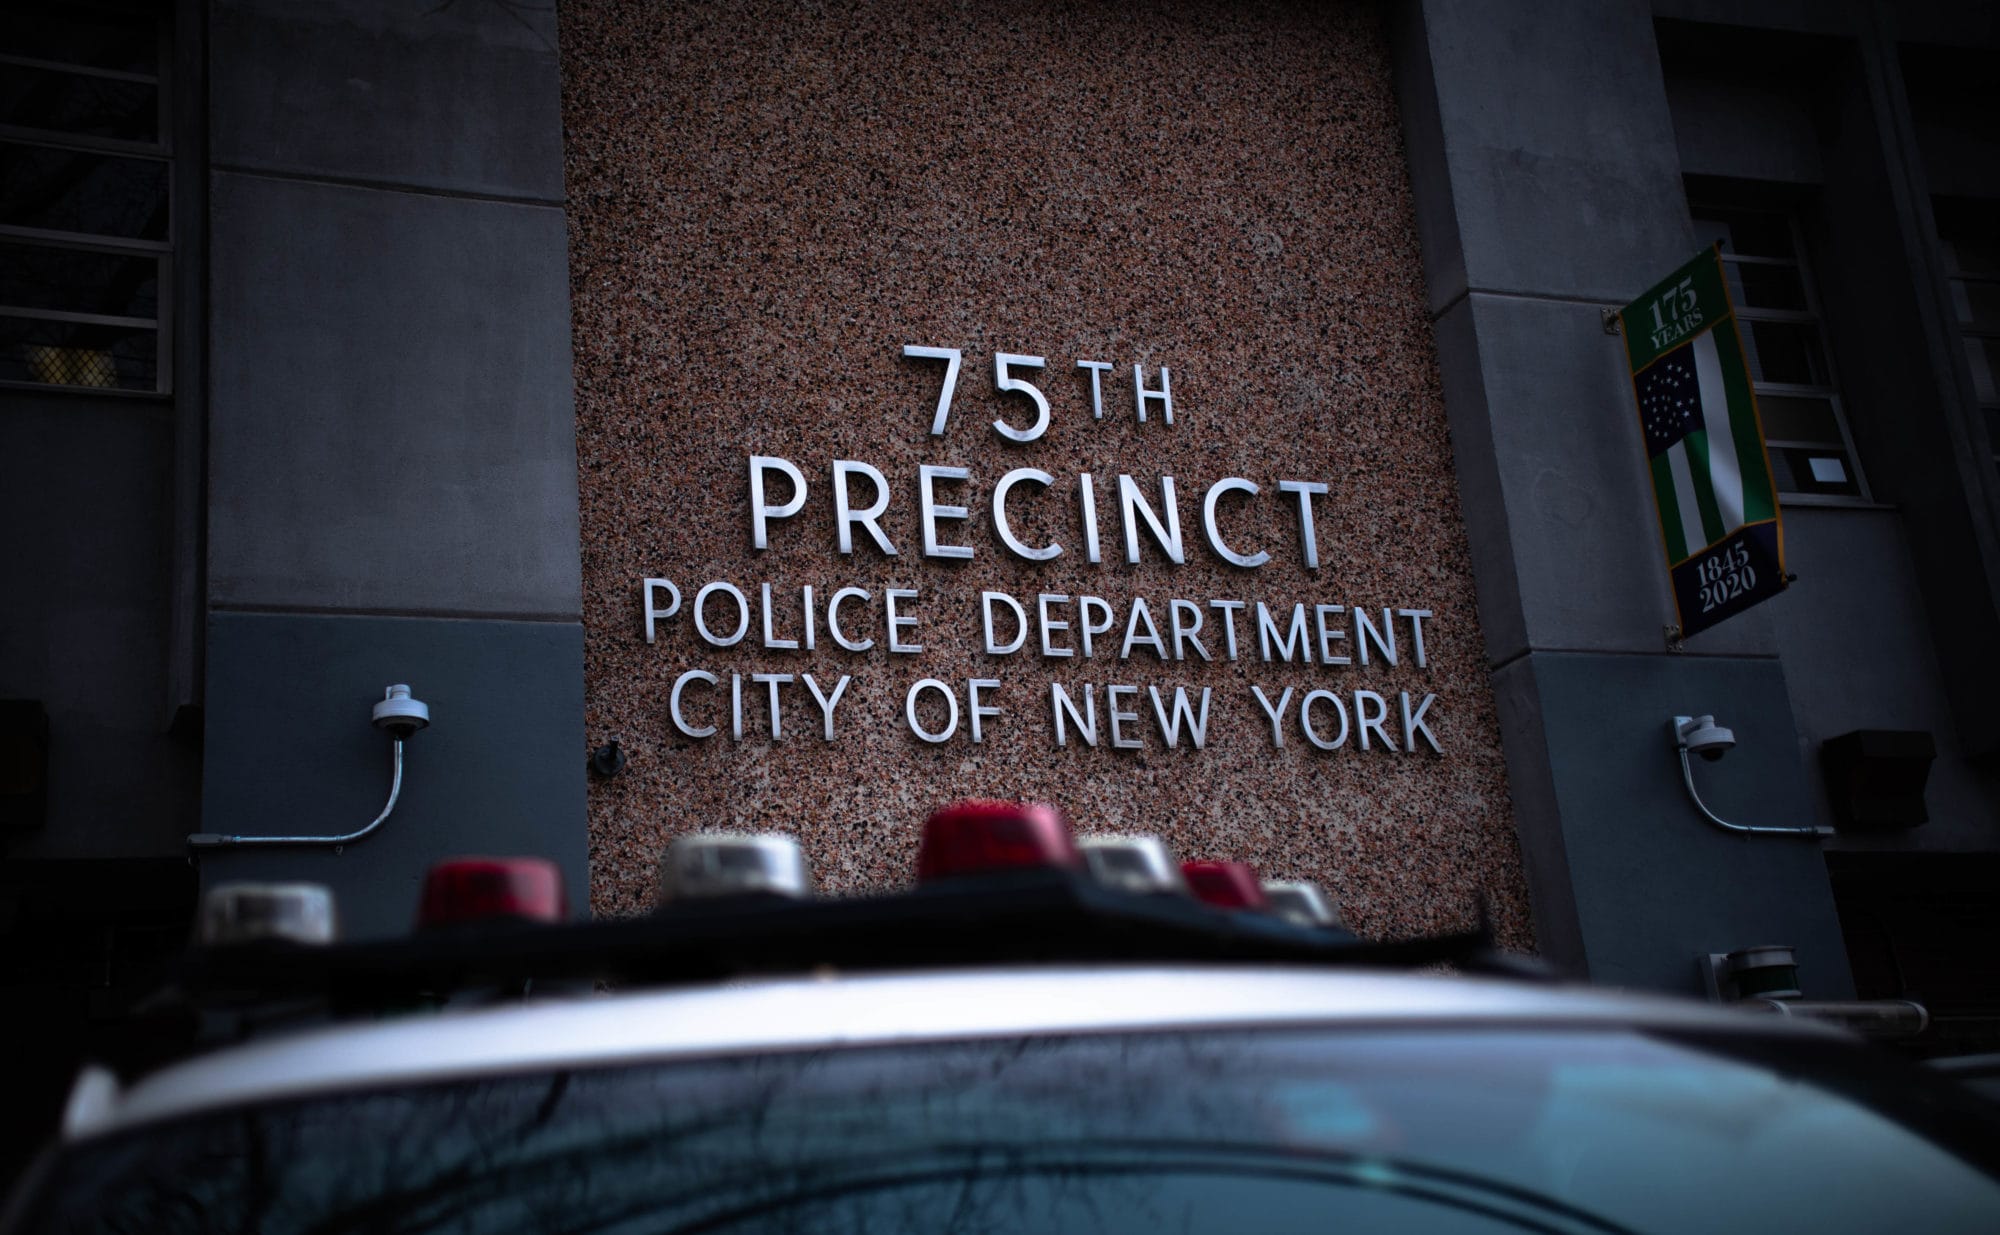 What Will It Take To Fix The City’s Most Troubled Police Precinct?